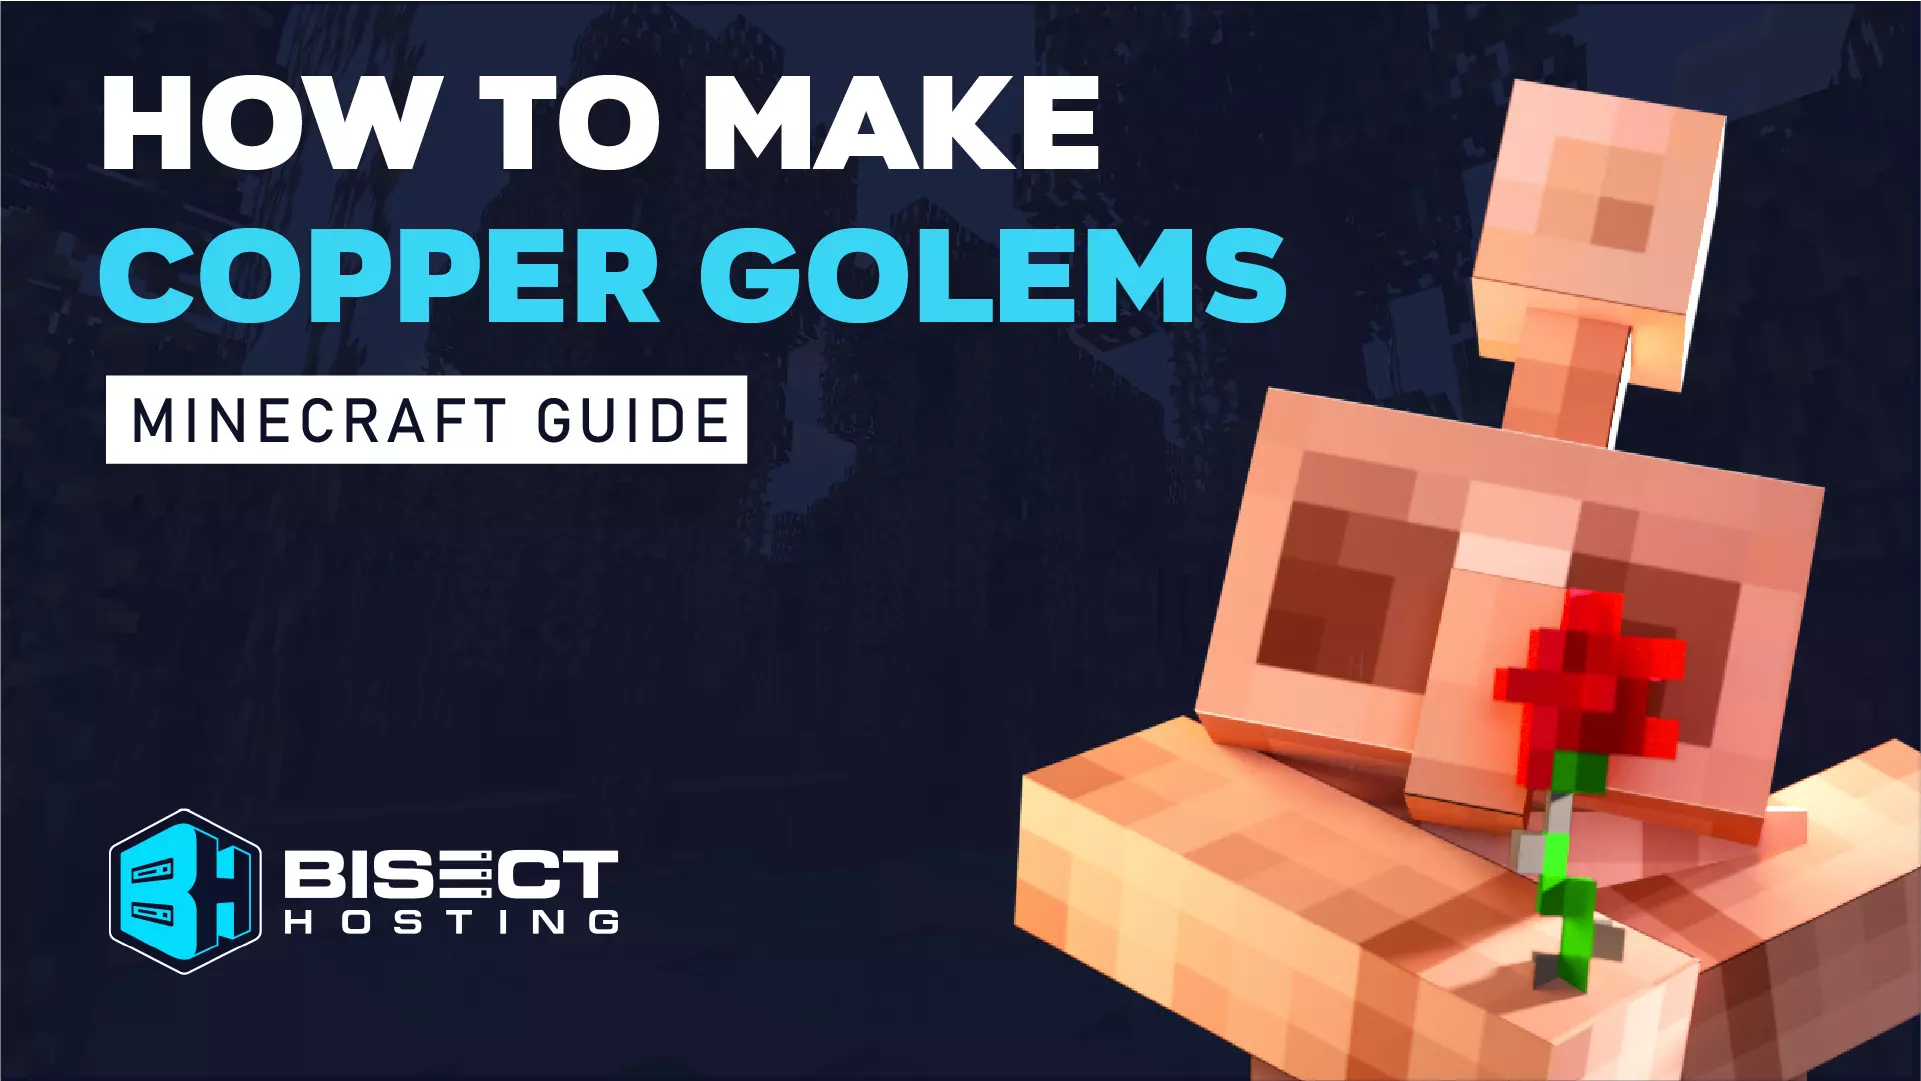 How to Make Copper Golems in Minecraft